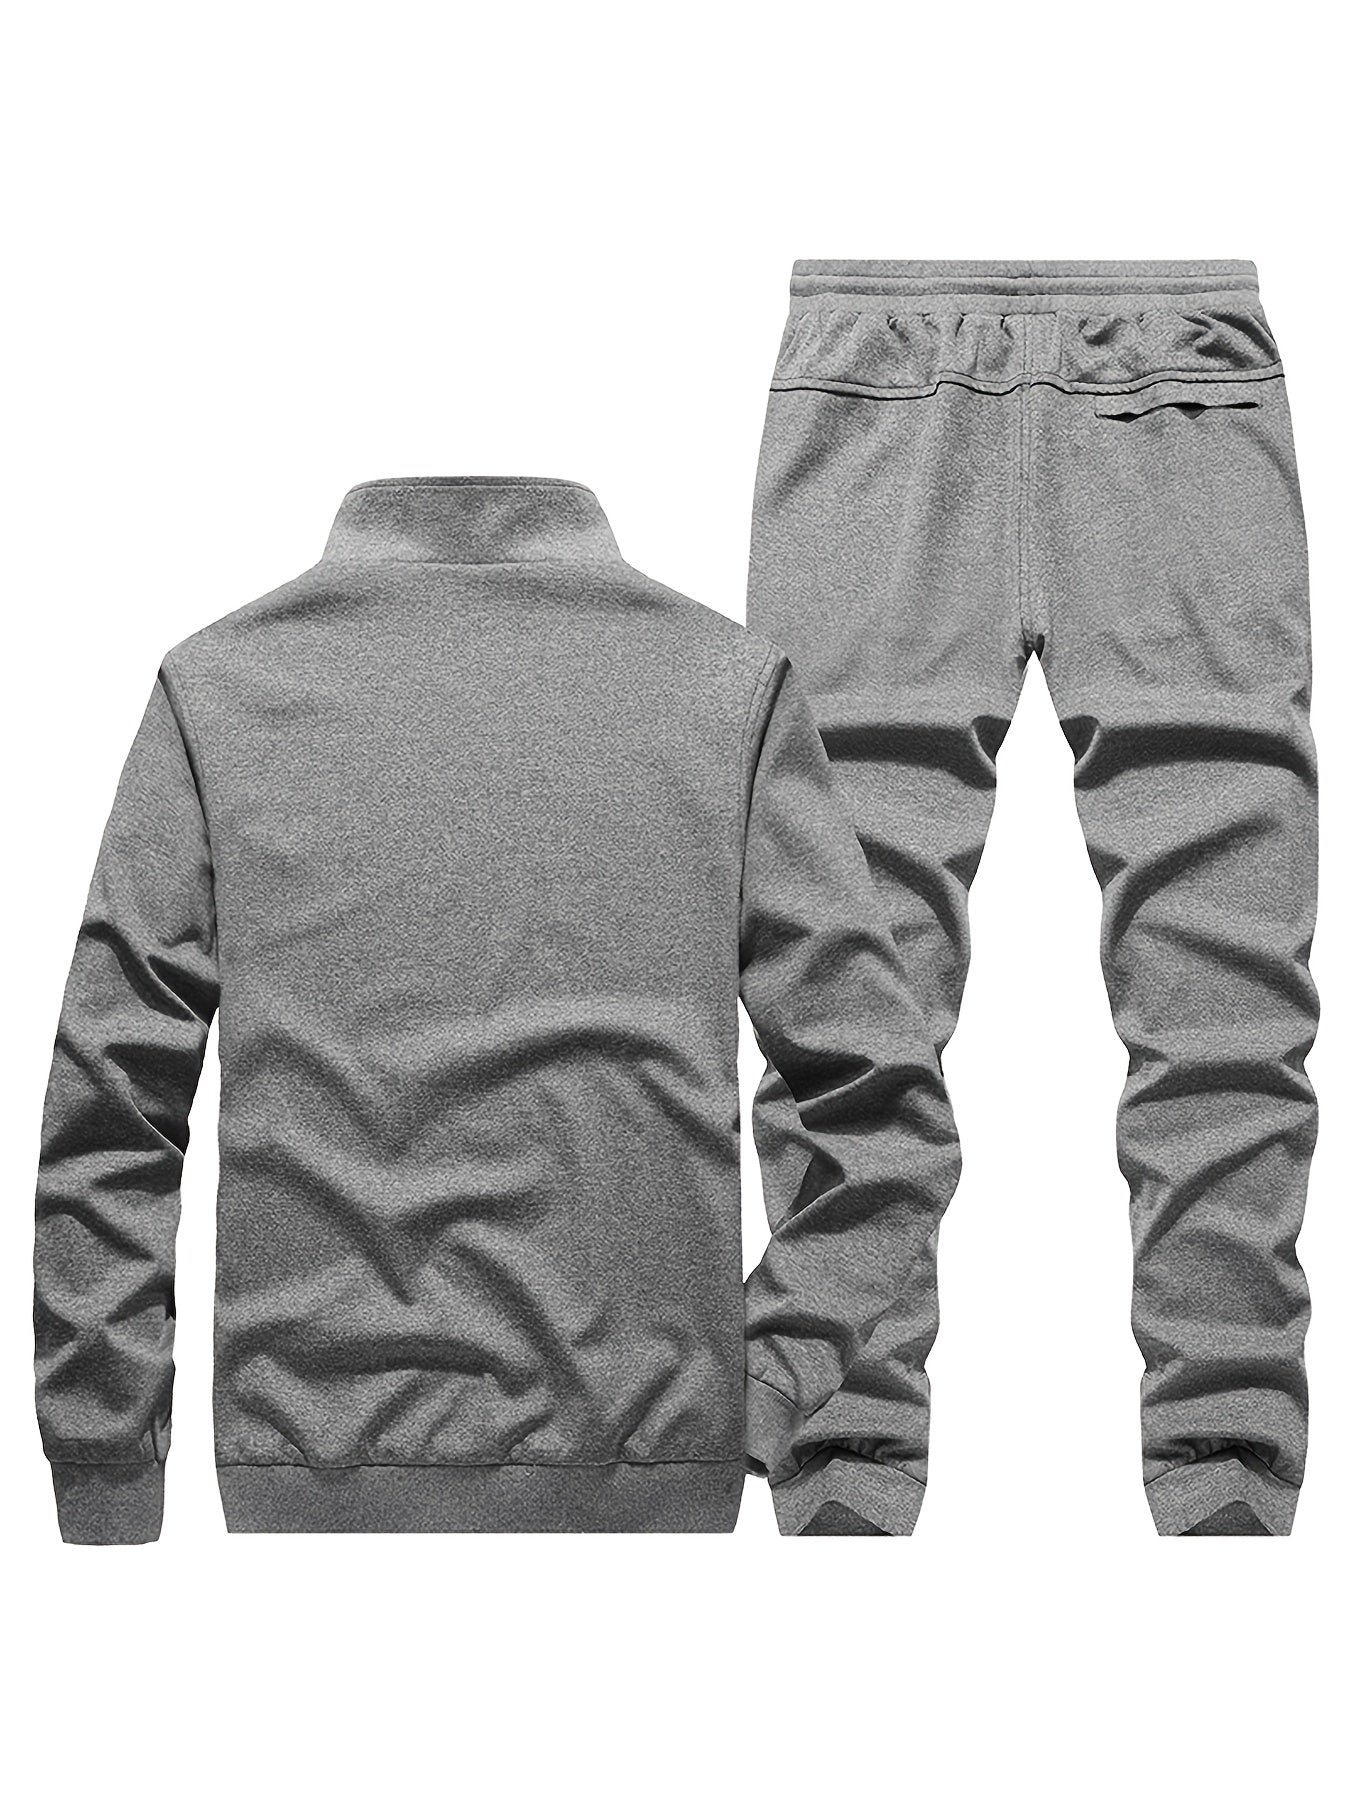 2pcs Men's Casual Sports Top & Bottom Sets, Stand Collar Zip Jacket With Pocket & Alphabet Print Drawstring Sweatpants Christmas Gifts